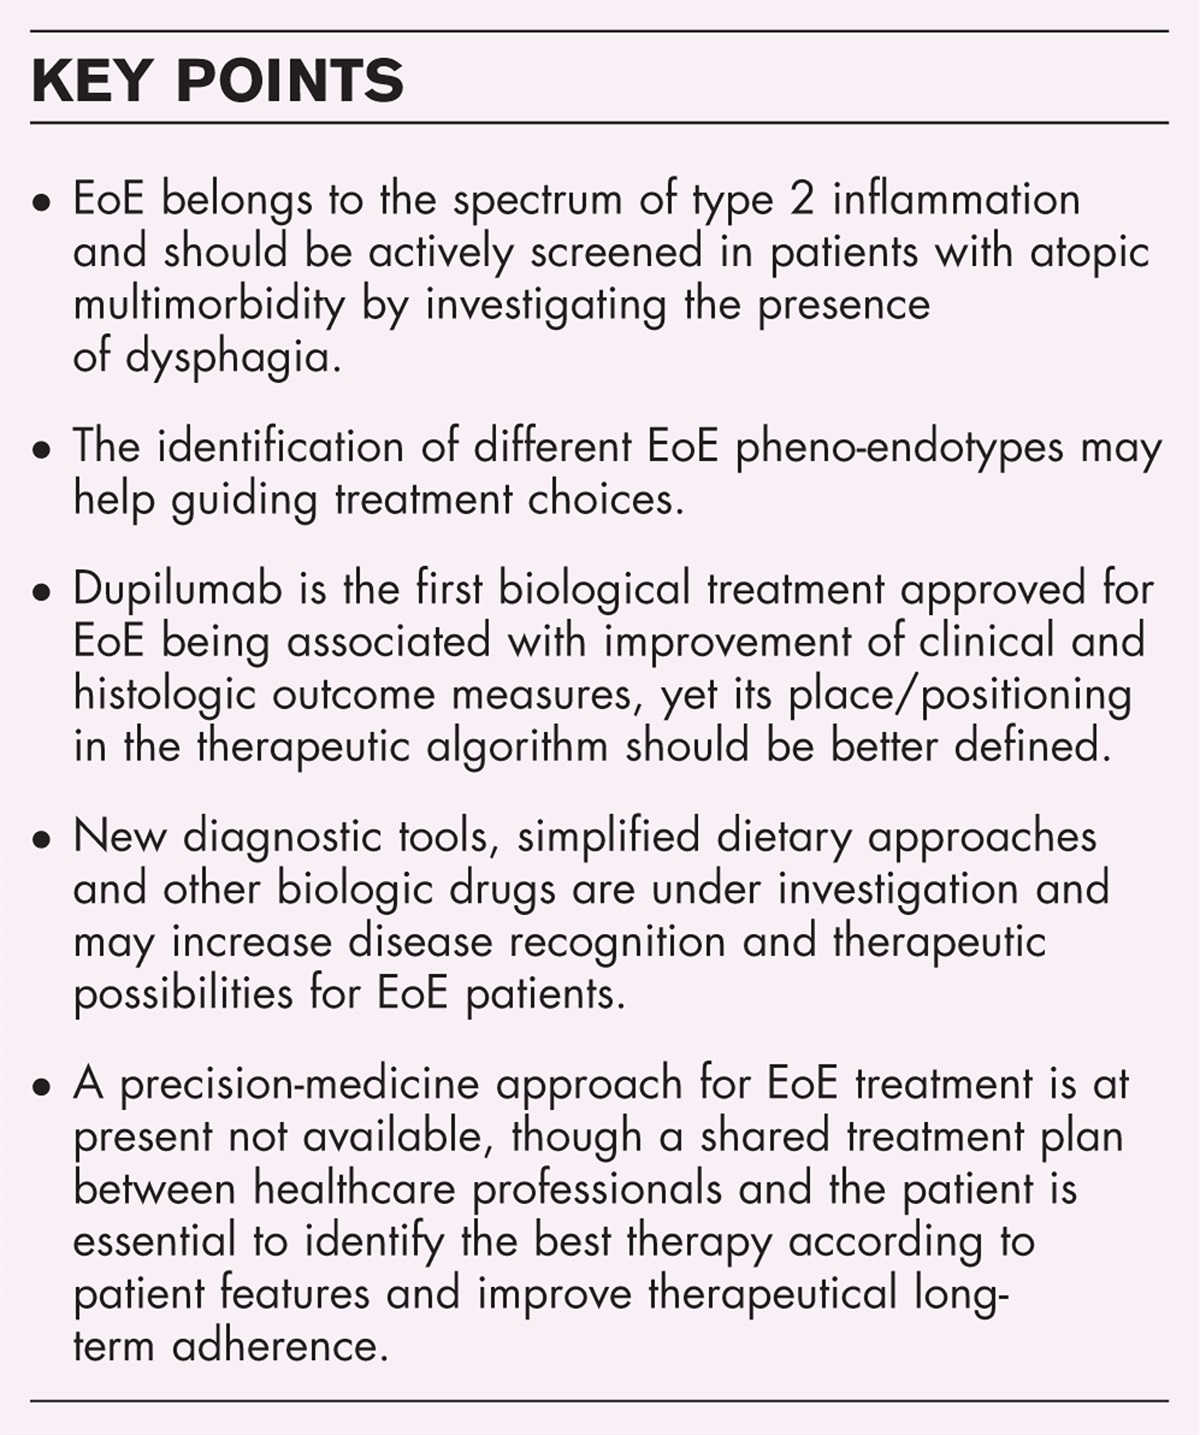 Diagnosis, management and therapeutic options for eosinophilic esophagitis